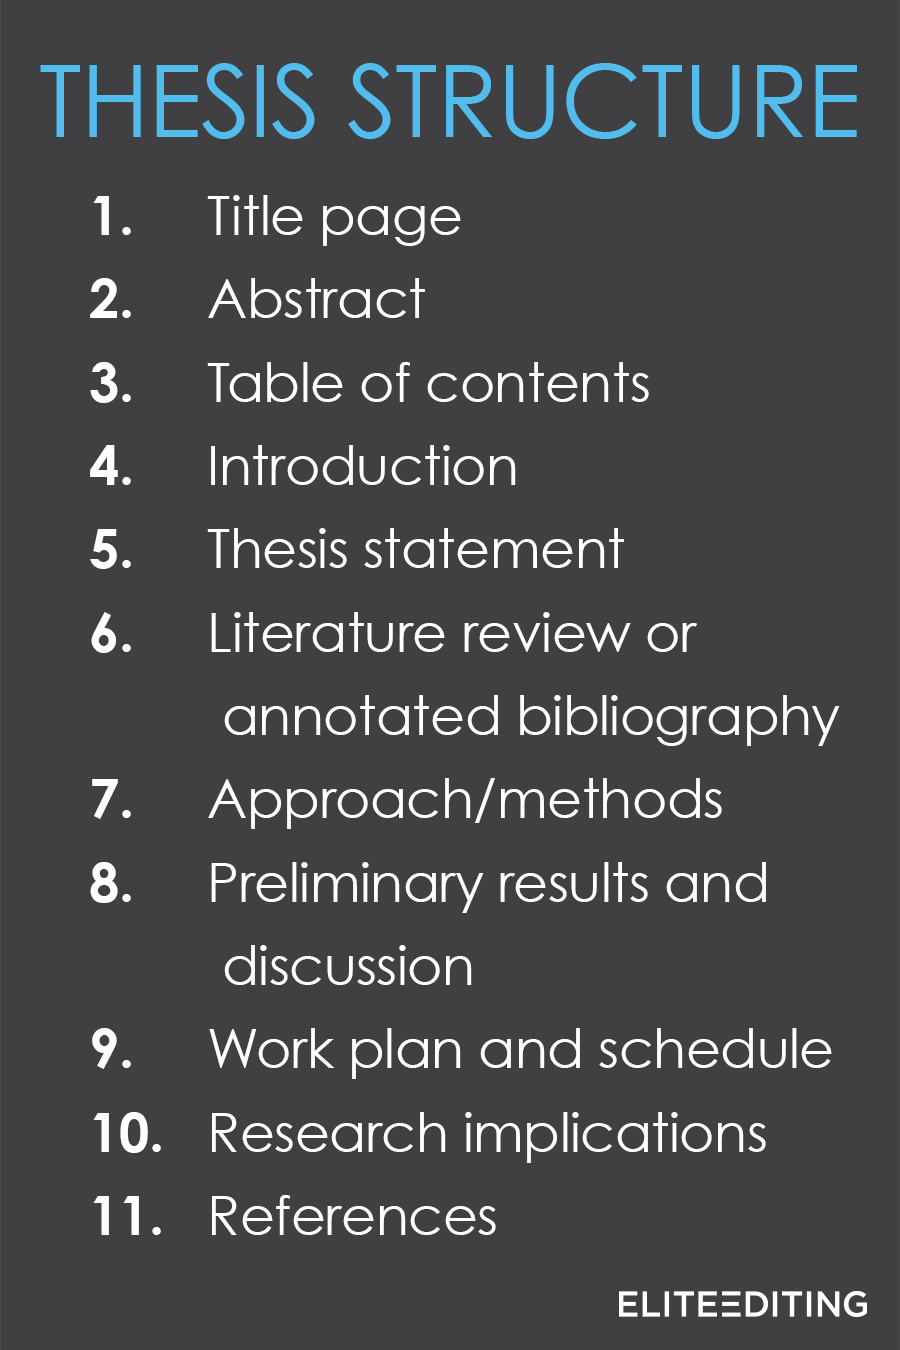 thesis structure outline